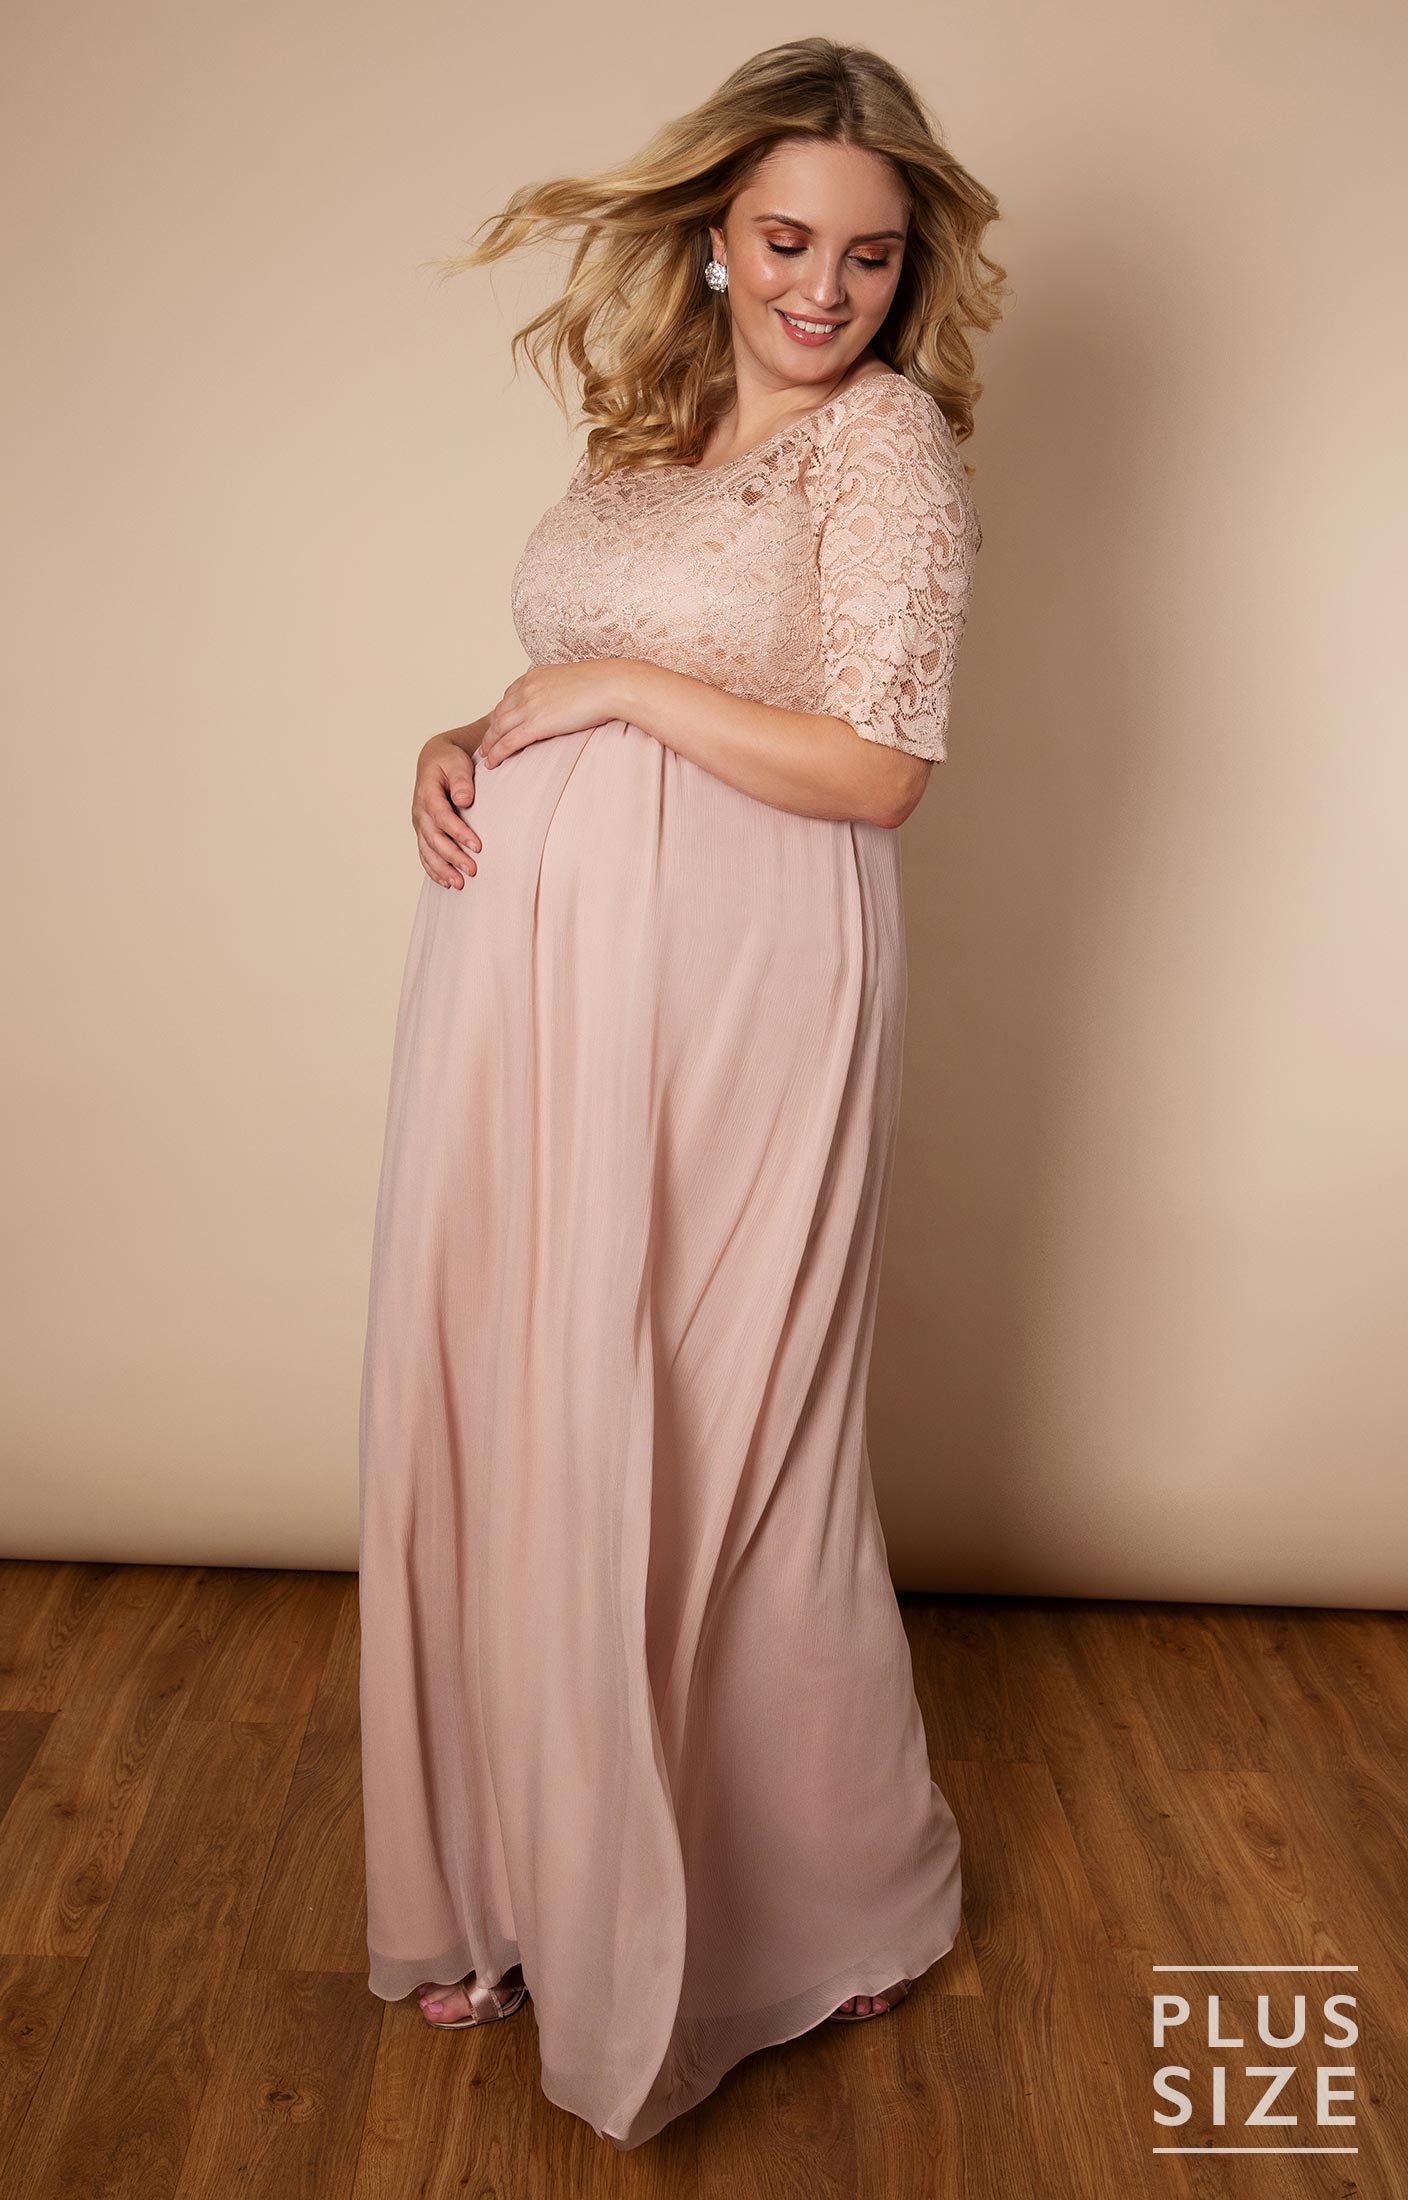 Alaska Size Maternity Chiffon Wedding Gown - Maternity Wedding Dresses, Evening Wear and Party Clothes by Tiffany Rose US